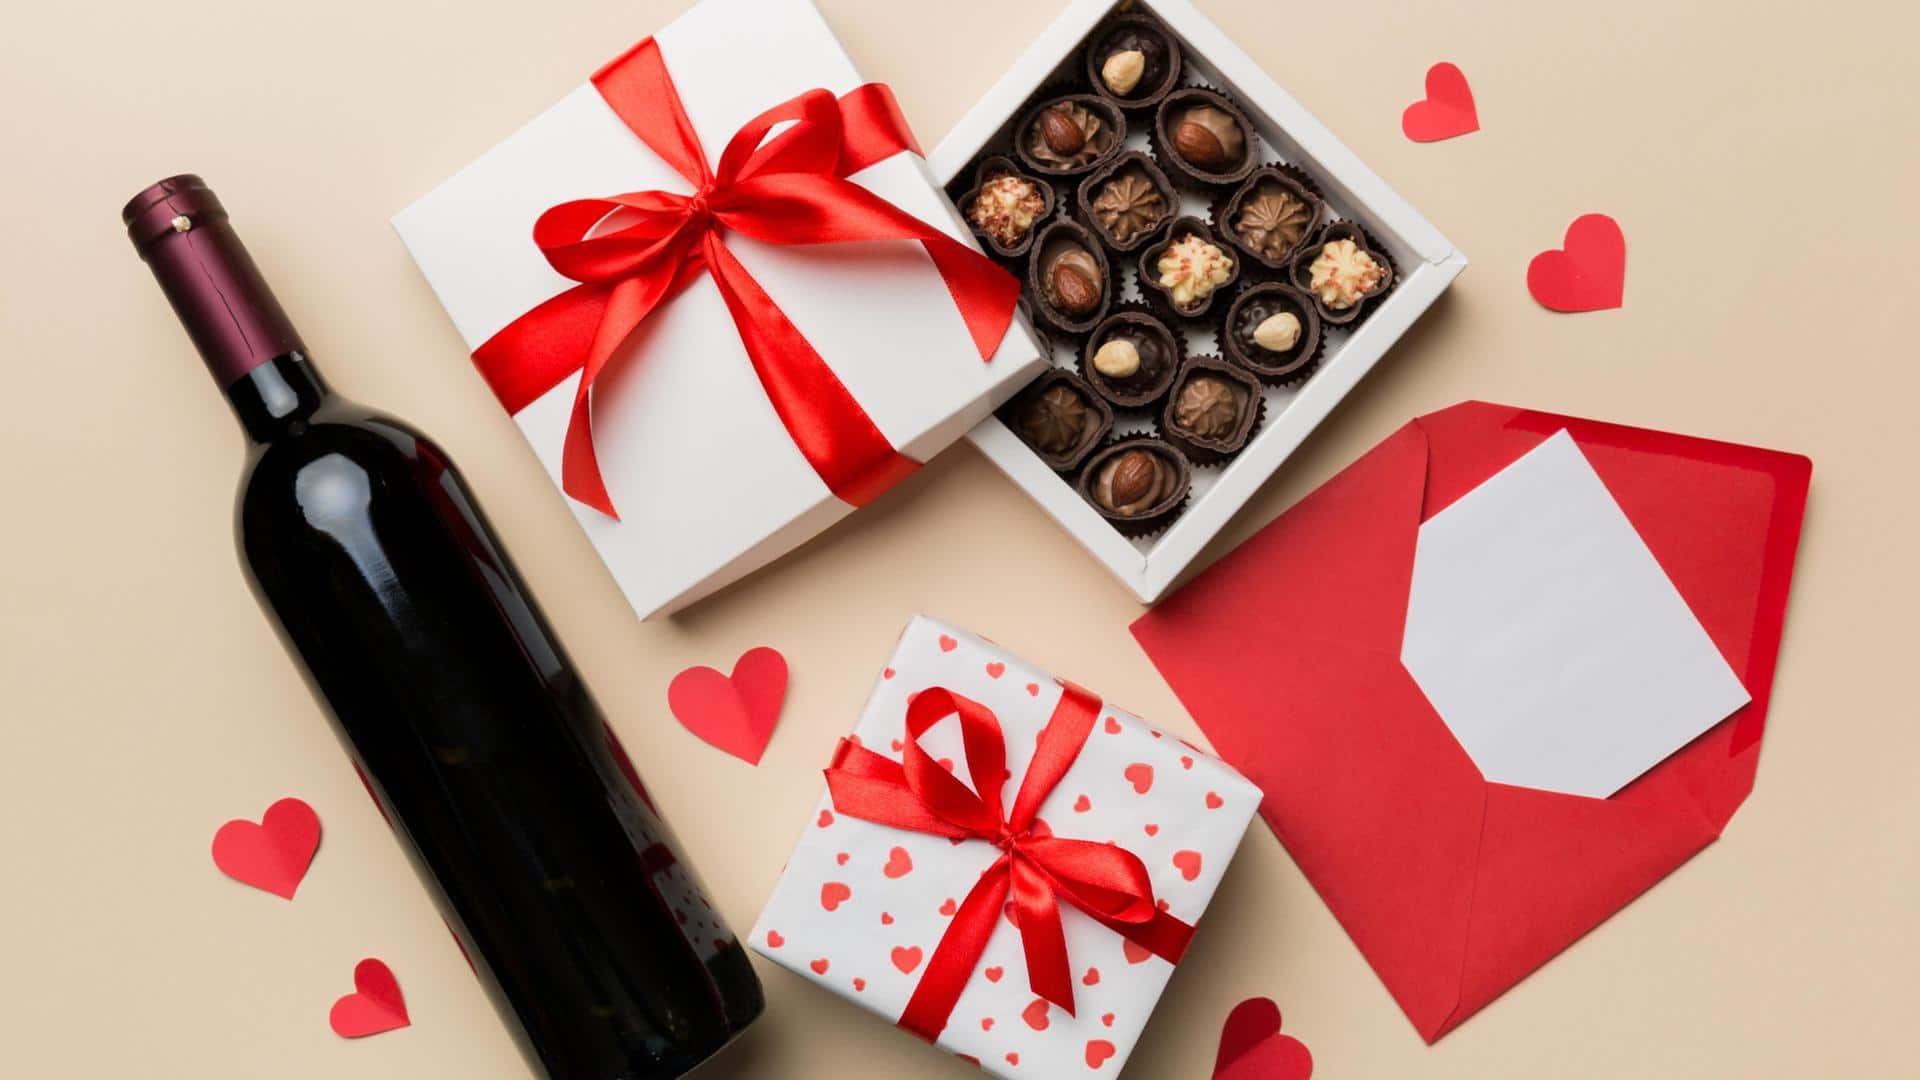 Valentine's Day date ideas to impress your bae